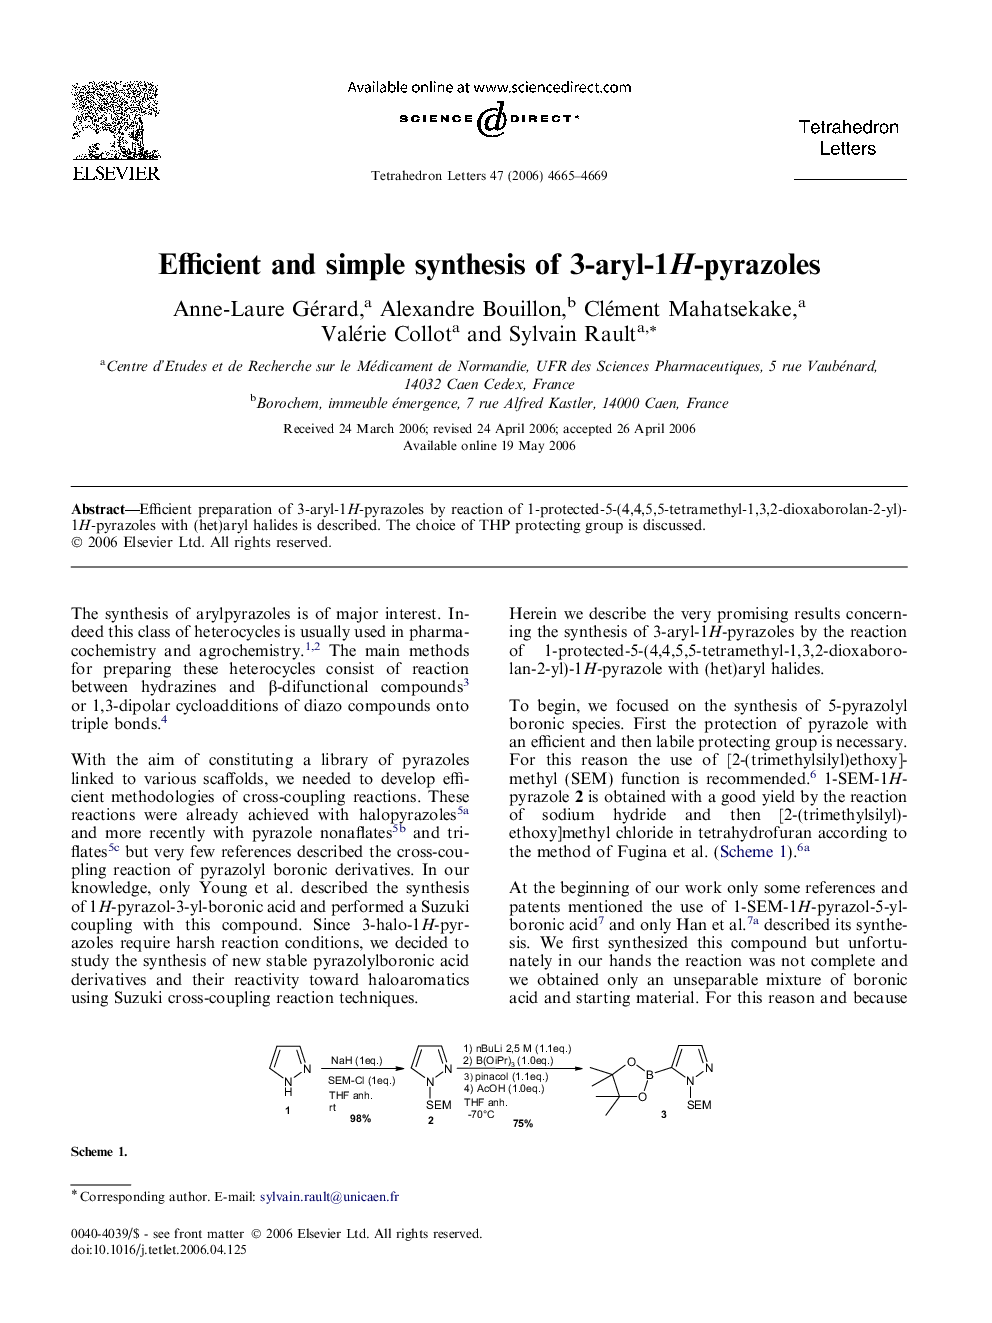 Efficient and simple synthesis of 3-aryl-1H-pyrazoles